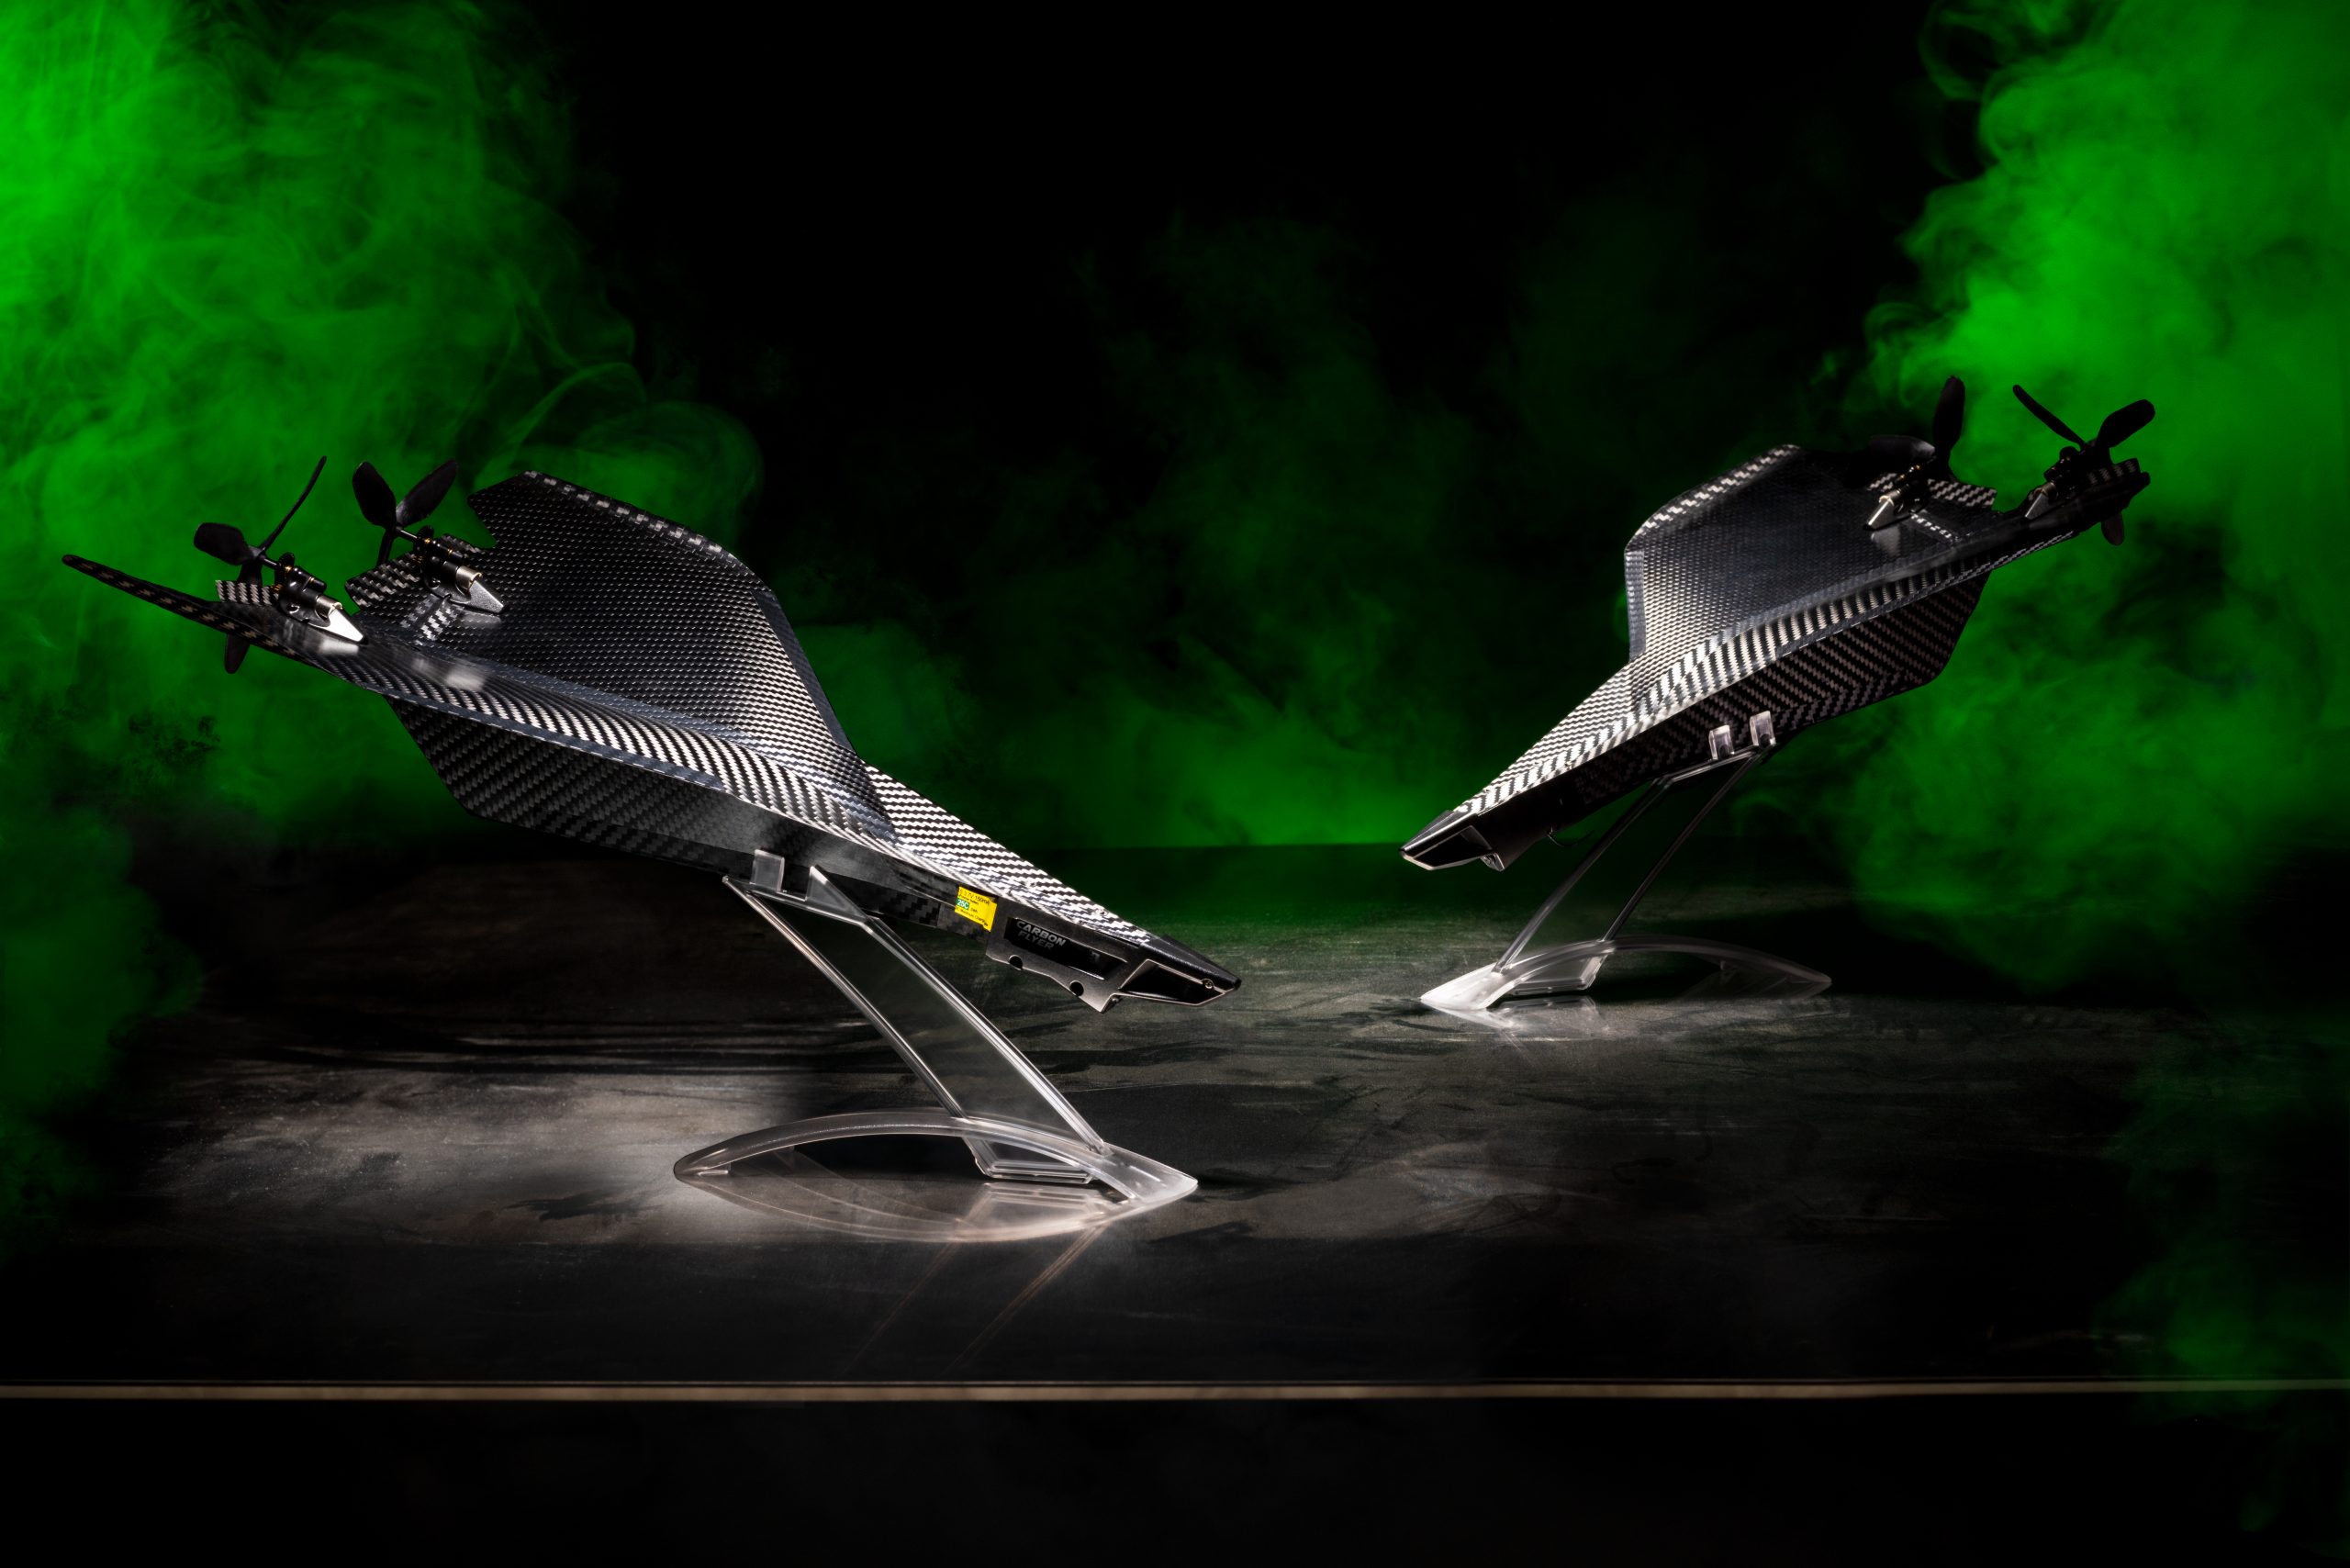 Two remote controlled Carbon Flyer planes with green smoke designed by Trident invents and photographed by UA Creative Studios